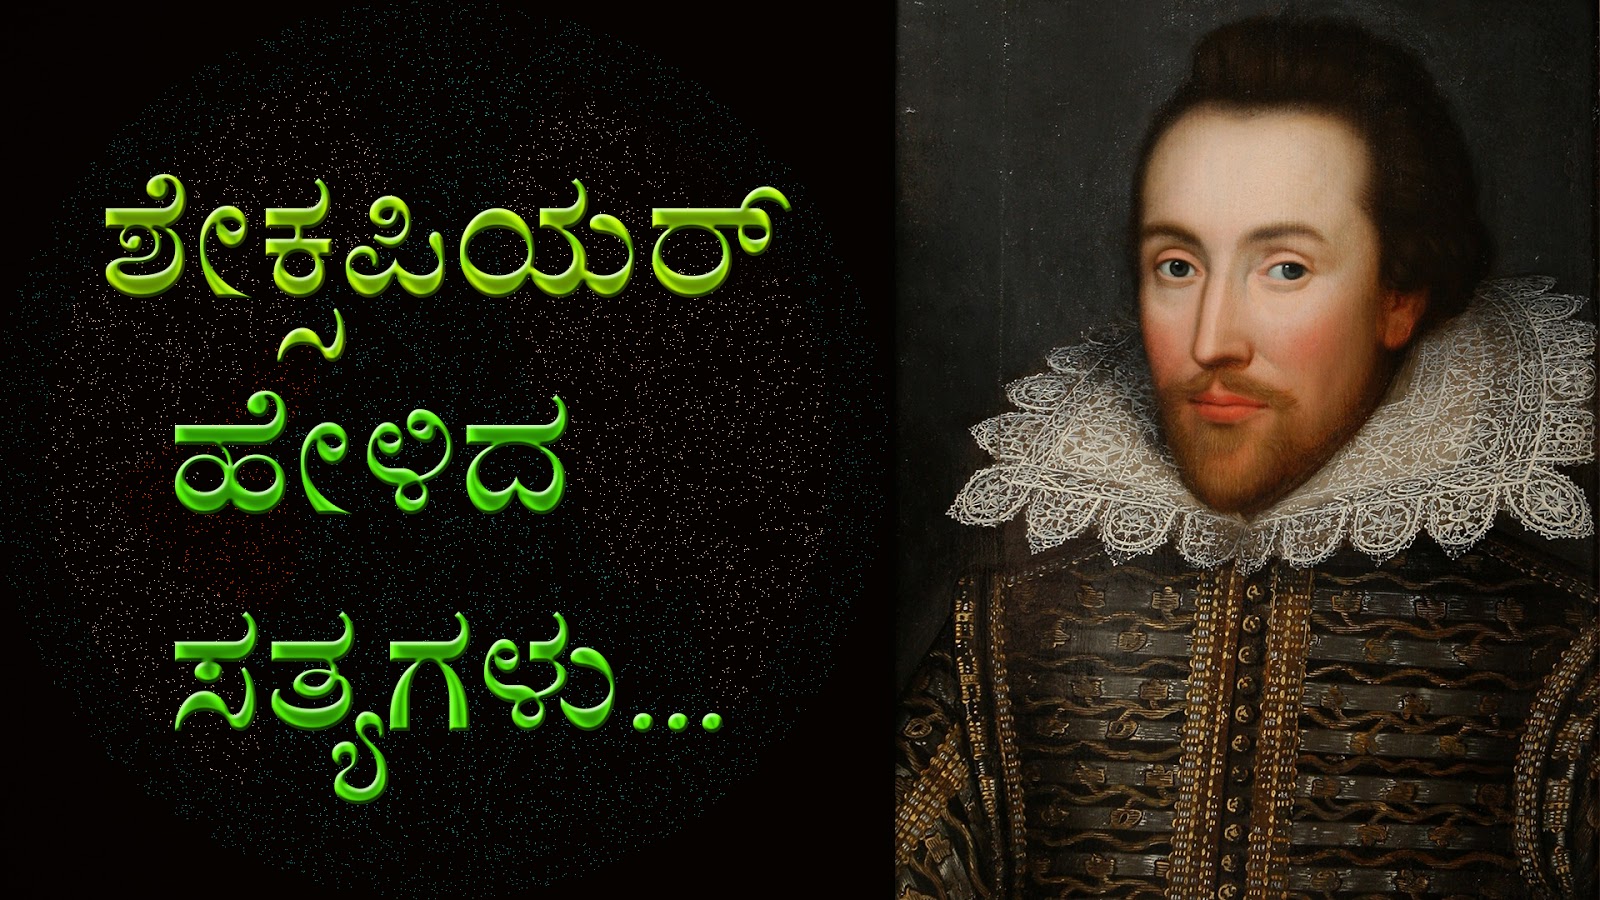 You are currently viewing ಷೇಕ್ಸಪಿಯರ್ ಹೇಳಿದ ಸತ್ಯಗಳು – Best Quotes of William Shakespeare in Kannada